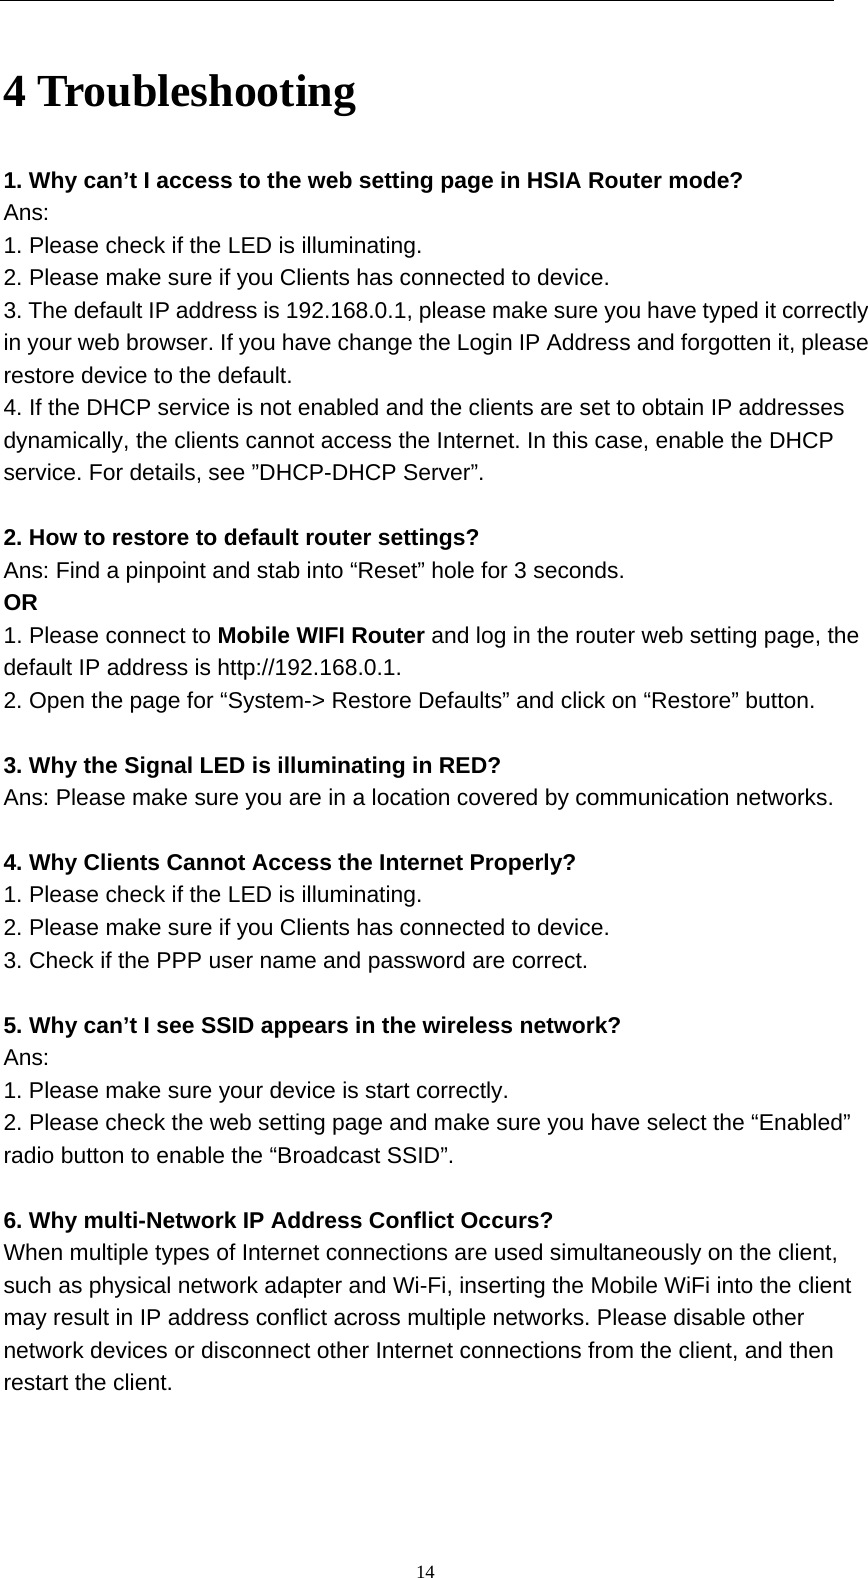   144 Troubleshooting 1. Why can’t I access to the web setting page in HSIA Router mode? Ans: 1. Please check if the LED is illuminating. 2. Please make sure if you Clients has connected to device. 3. The default IP address is 192.168.0.1, please make sure you have typed it correctly in your web browser. If you have change the Login IP Address and forgotten it, please restore device to the default. 4. If the DHCP service is not enabled and the clients are set to obtain IP addresses dynamically, the clients cannot access the Internet. In this case, enable the DHCP service. For details, see ”DHCP-DHCP Server”.  2. How to restore to default router settings? Ans: Find a pinpoint and stab into “Reset” hole for 3 seconds. OR 1. Please connect to Mobile WIFI Router and log in the router web setting page, the default IP address is http://192.168.0.1. 2. Open the page for “System-&gt; Restore Defaults” and click on “Restore” button.  3. Why the Signal LED is illuminating in RED? Ans: Please make sure you are in a location covered by communication networks.  4. Why Clients Cannot Access the Internet Properly? 1. Please check if the LED is illuminating. 2. Please make sure if you Clients has connected to device. 3. Check if the PPP user name and password are correct.  5. Why can’t I see SSID appears in the wireless network? Ans: 1. Please make sure your device is start correctly. 2. Please check the web setting page and make sure you have select the “Enabled” radio button to enable the “Broadcast SSID”.  6. Why multi-Network IP Address Conflict Occurs? When multiple types of Internet connections are used simultaneously on the client, such as physical network adapter and Wi-Fi, inserting the Mobile WiFi into the client may result in IP address conflict across multiple networks. Please disable other network devices or disconnect other Internet connections from the client, and then restart the client. 